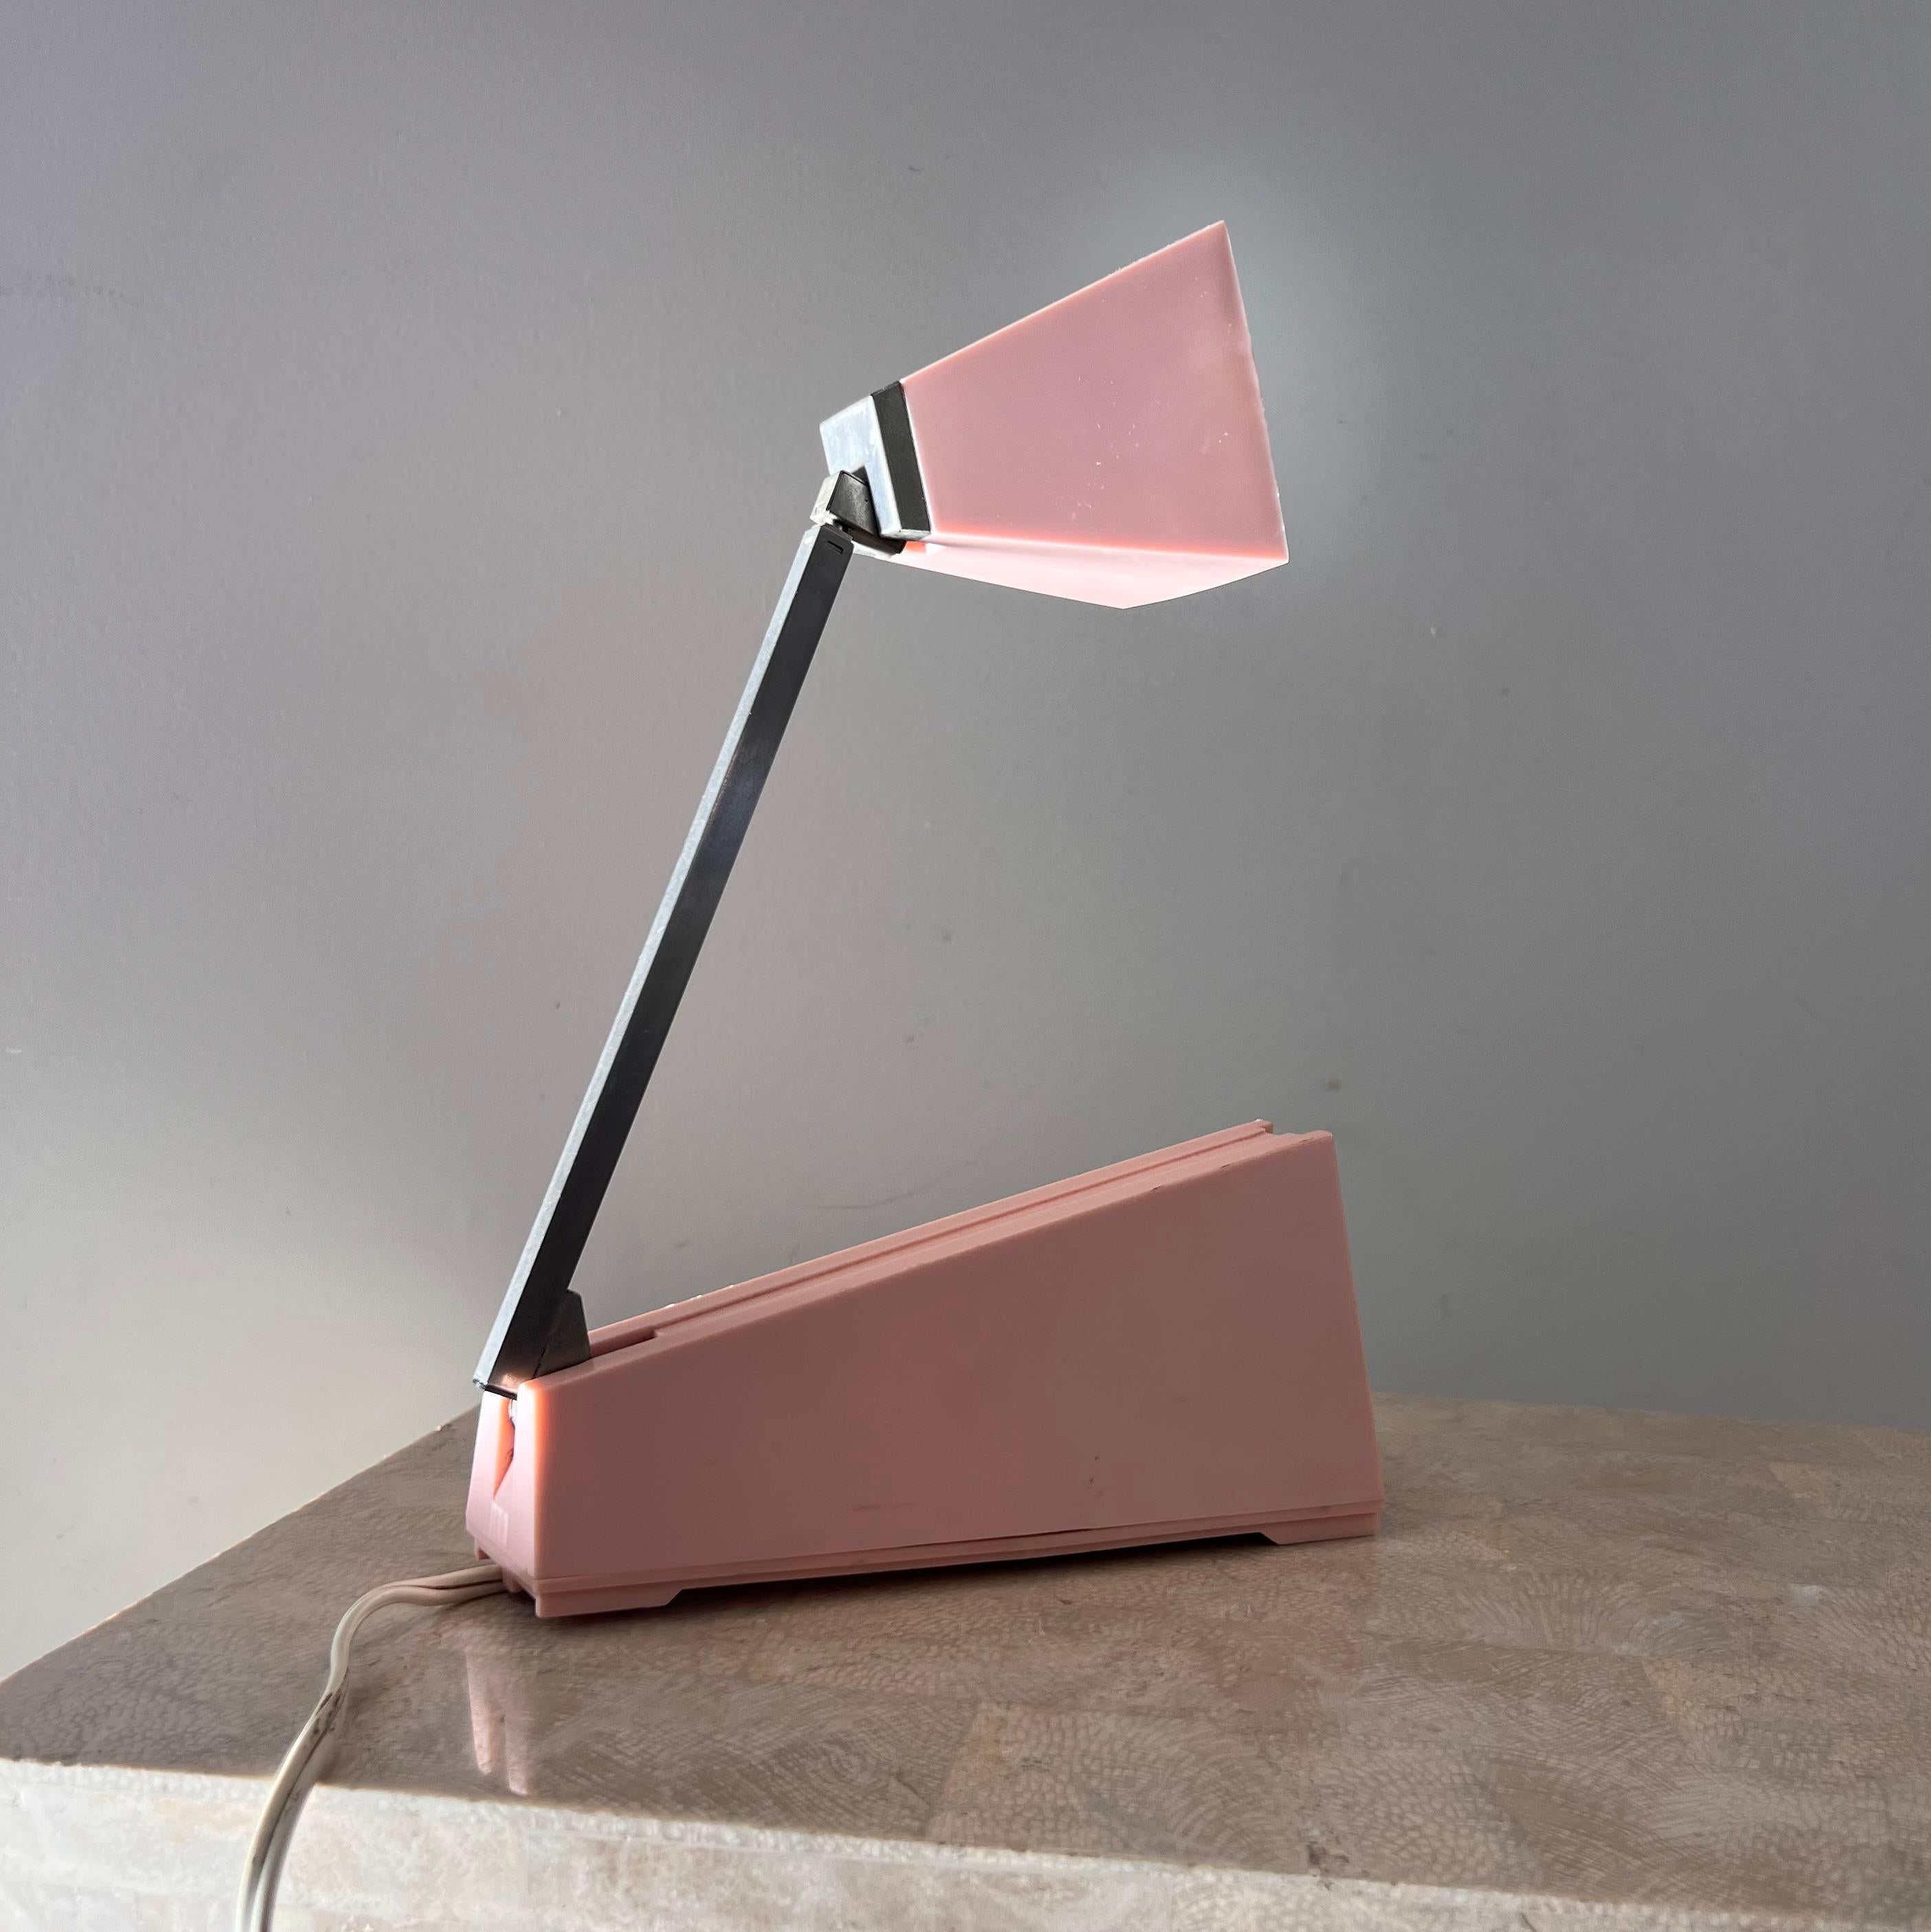 A space age “Lampette” task lamp in chrome and pastel pink by Koch Creations, Japan 1964. Neck collapses into body when summoned. Chord reads “yazaki 1965”. Pick up in central west Los Angeles or we ship worldwide.

When collapsed: 10” W x 2.75” D x